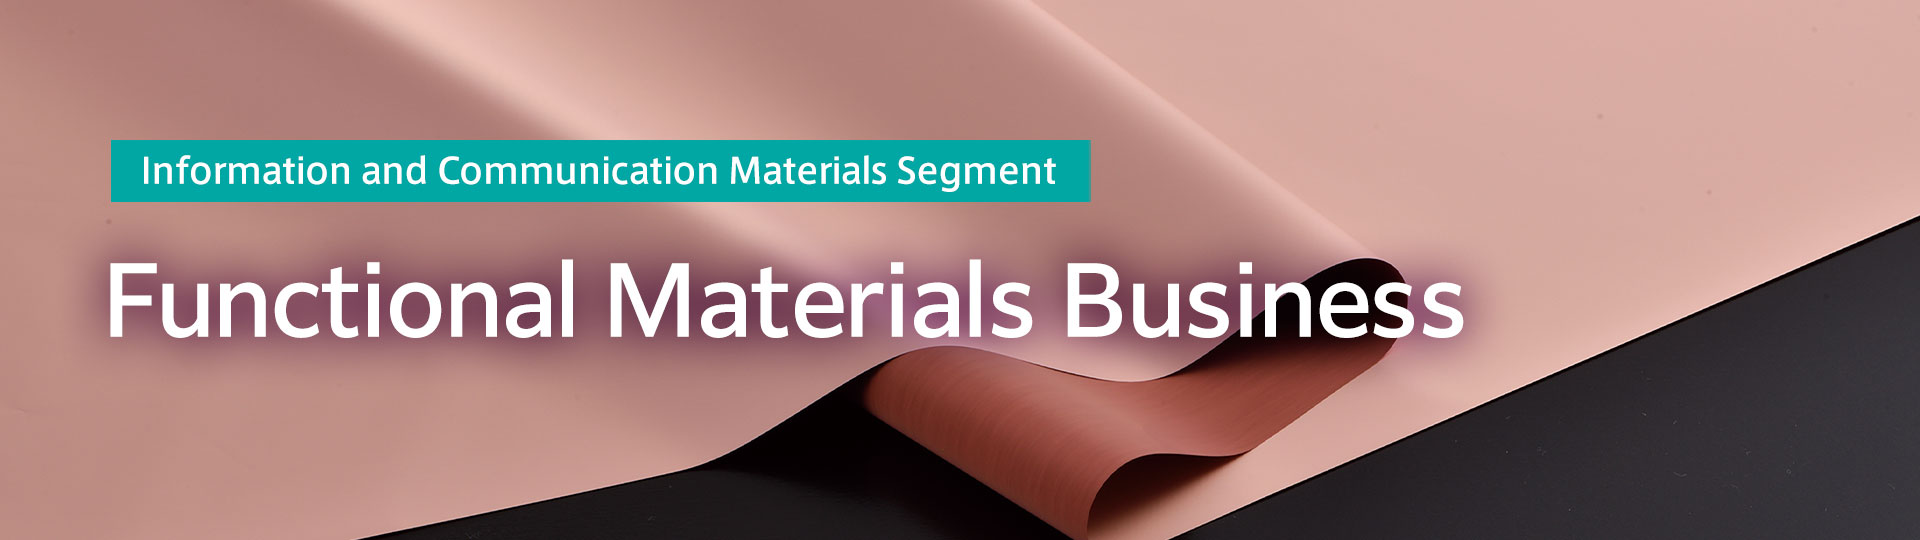 Information and Communication Materials Segment Functional Materials Business